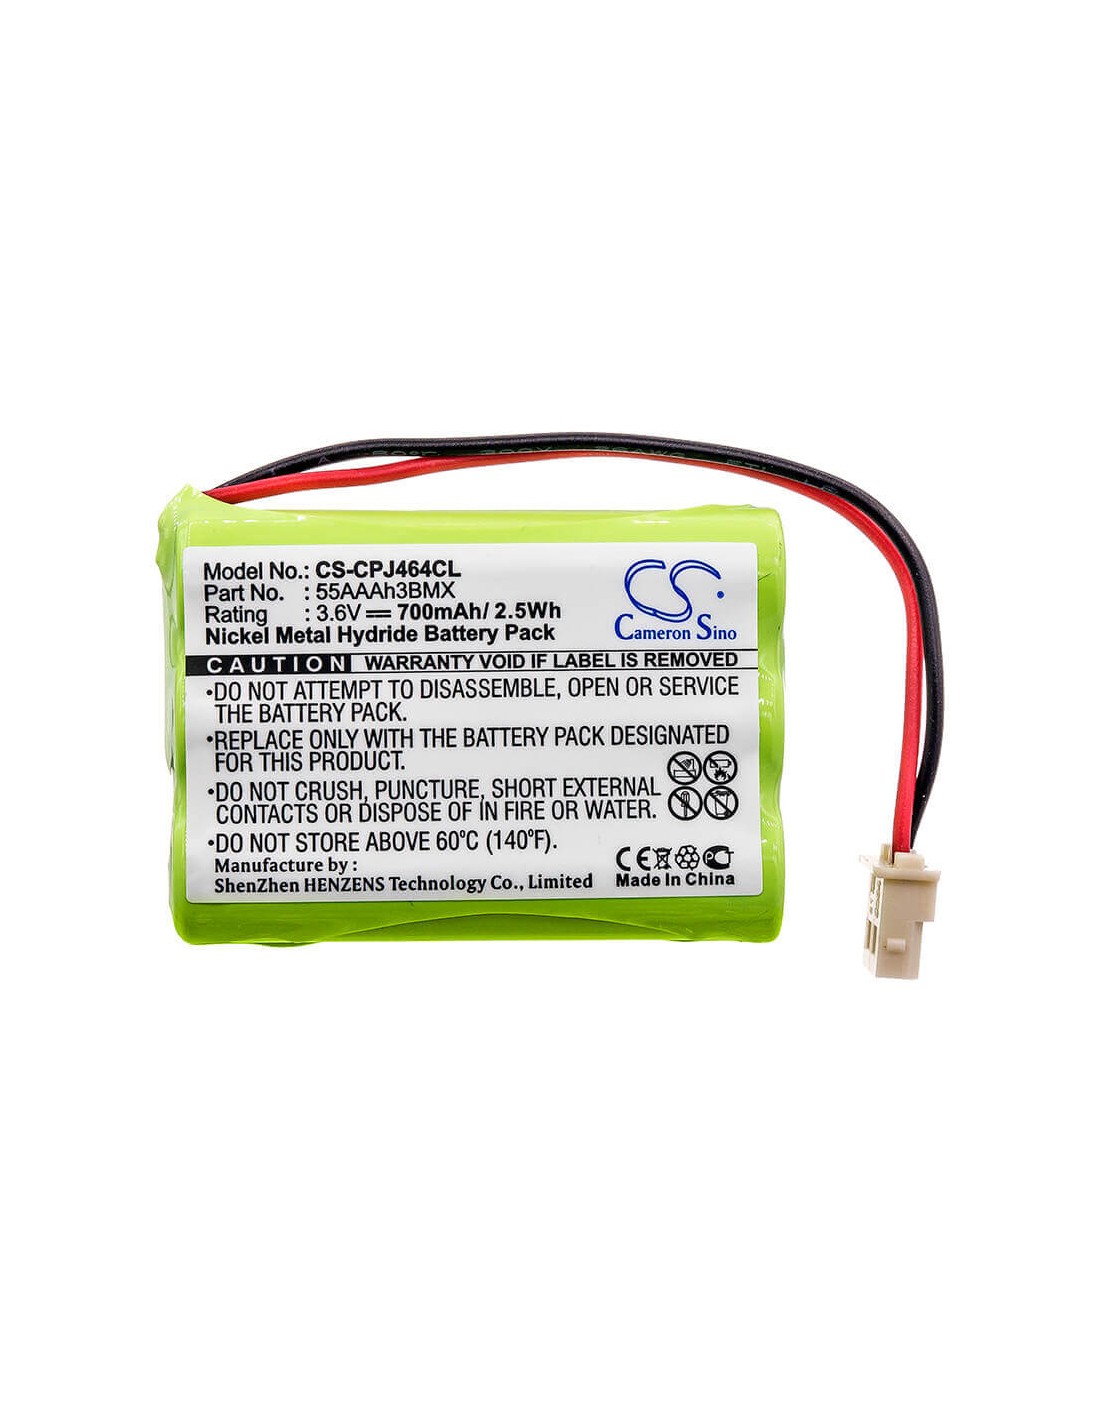 Battery for American, 2141cll 3.6V, 700mAh - 2.52Wh